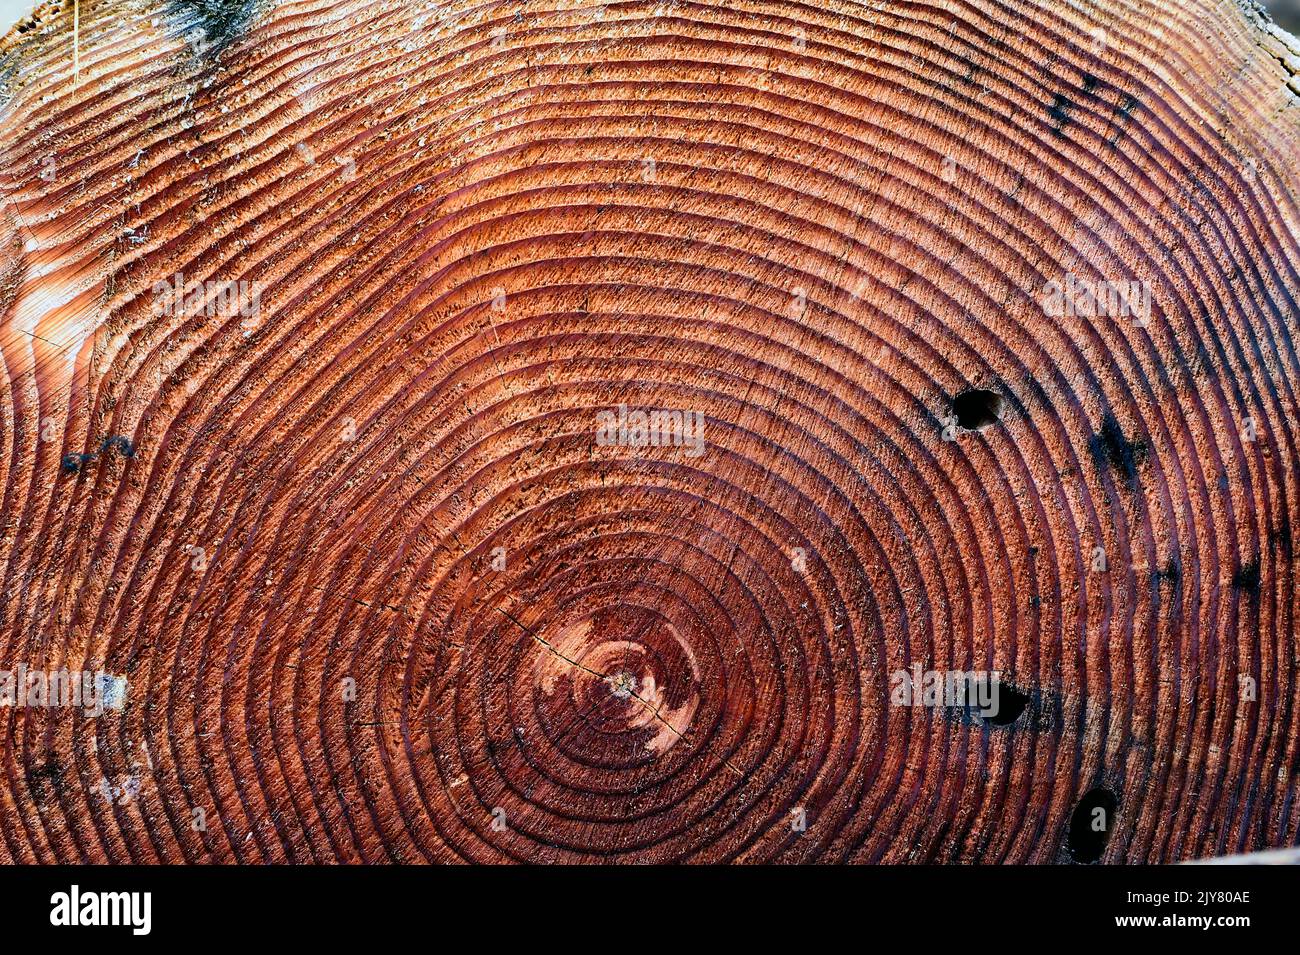 A cross section of a tree trunk showing the growth rings of the tree. Stock Photo